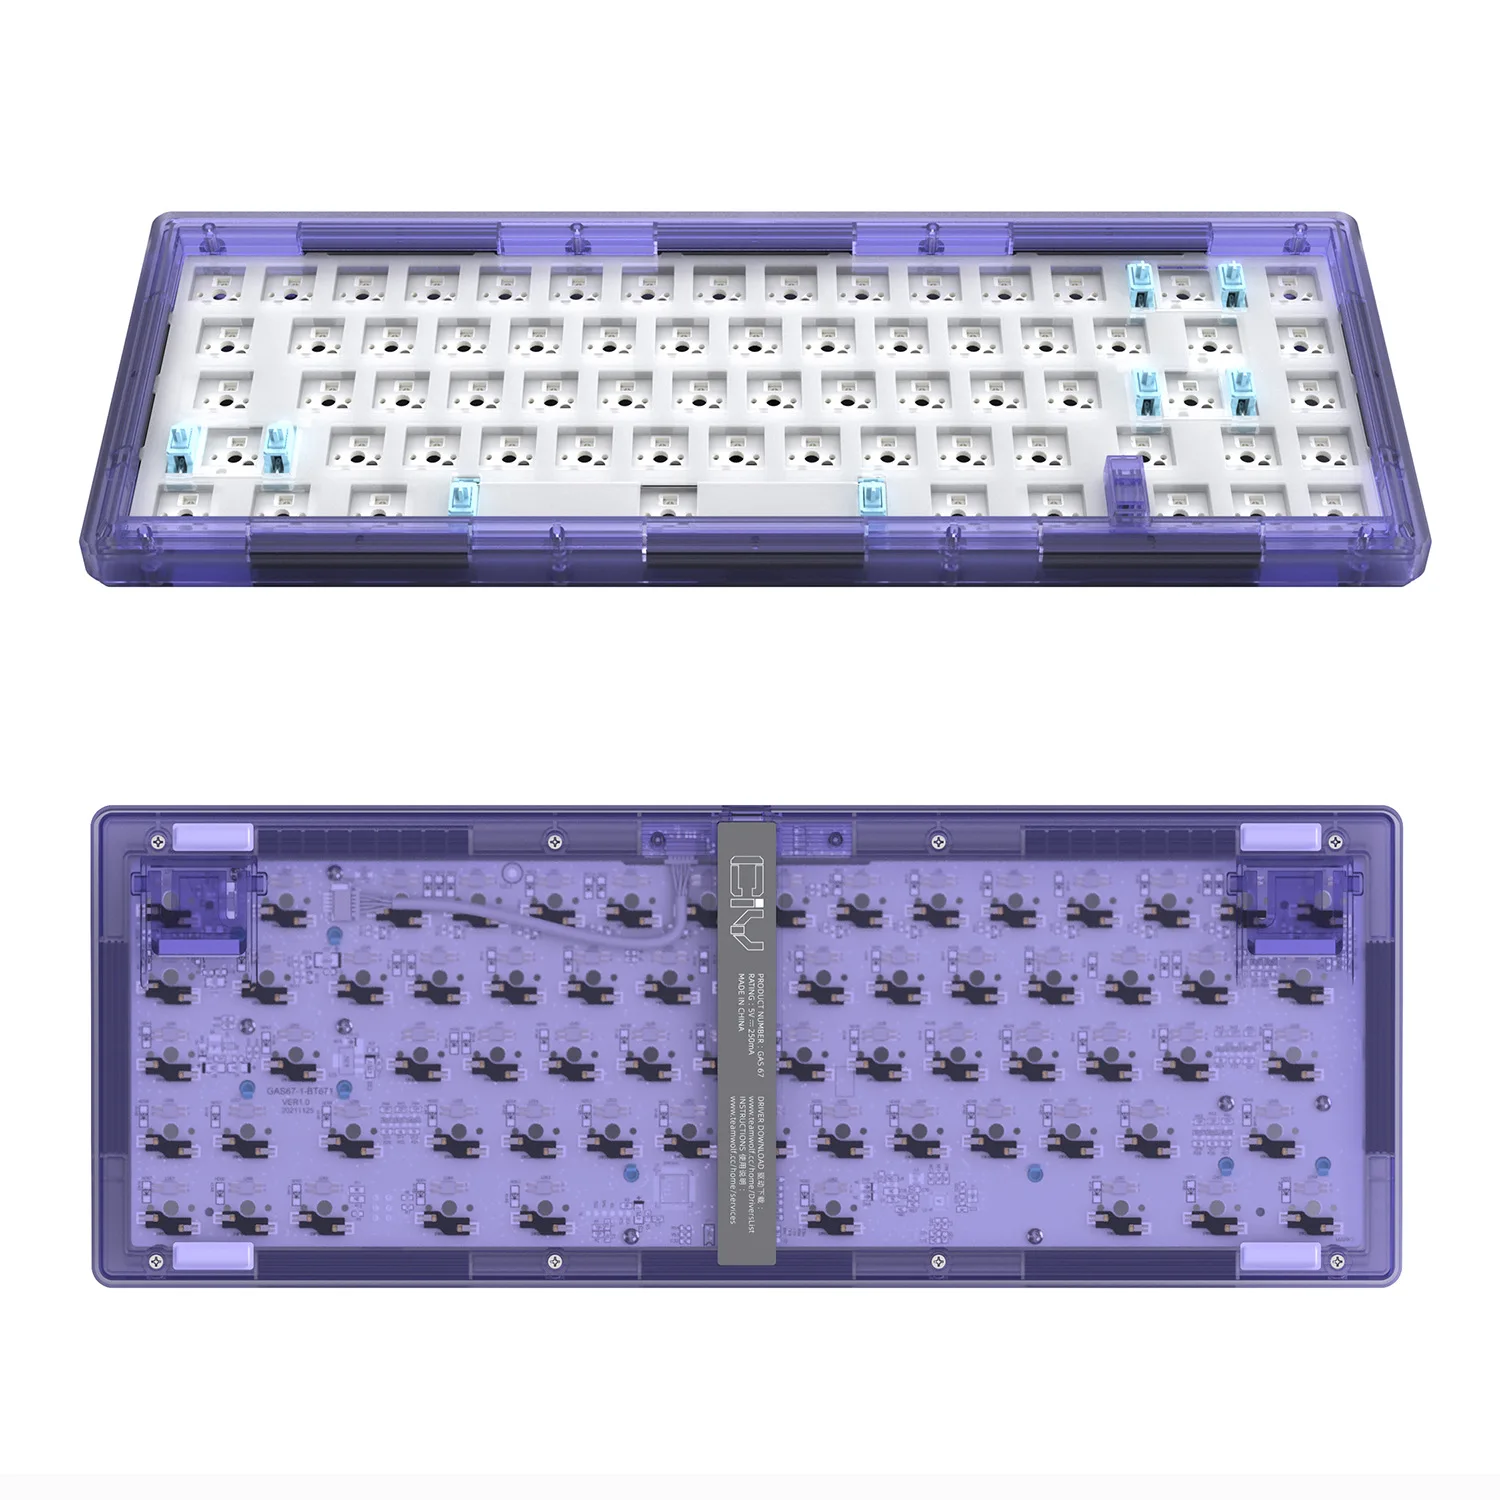 Weikav Ciy Gas67 Gasket Transparent Case Hotswap Wired Mechanical Keyboard  Kit With Rgb Light - Buy Gas67,Ciy Gas67,Weikav Product on Alibaba.com